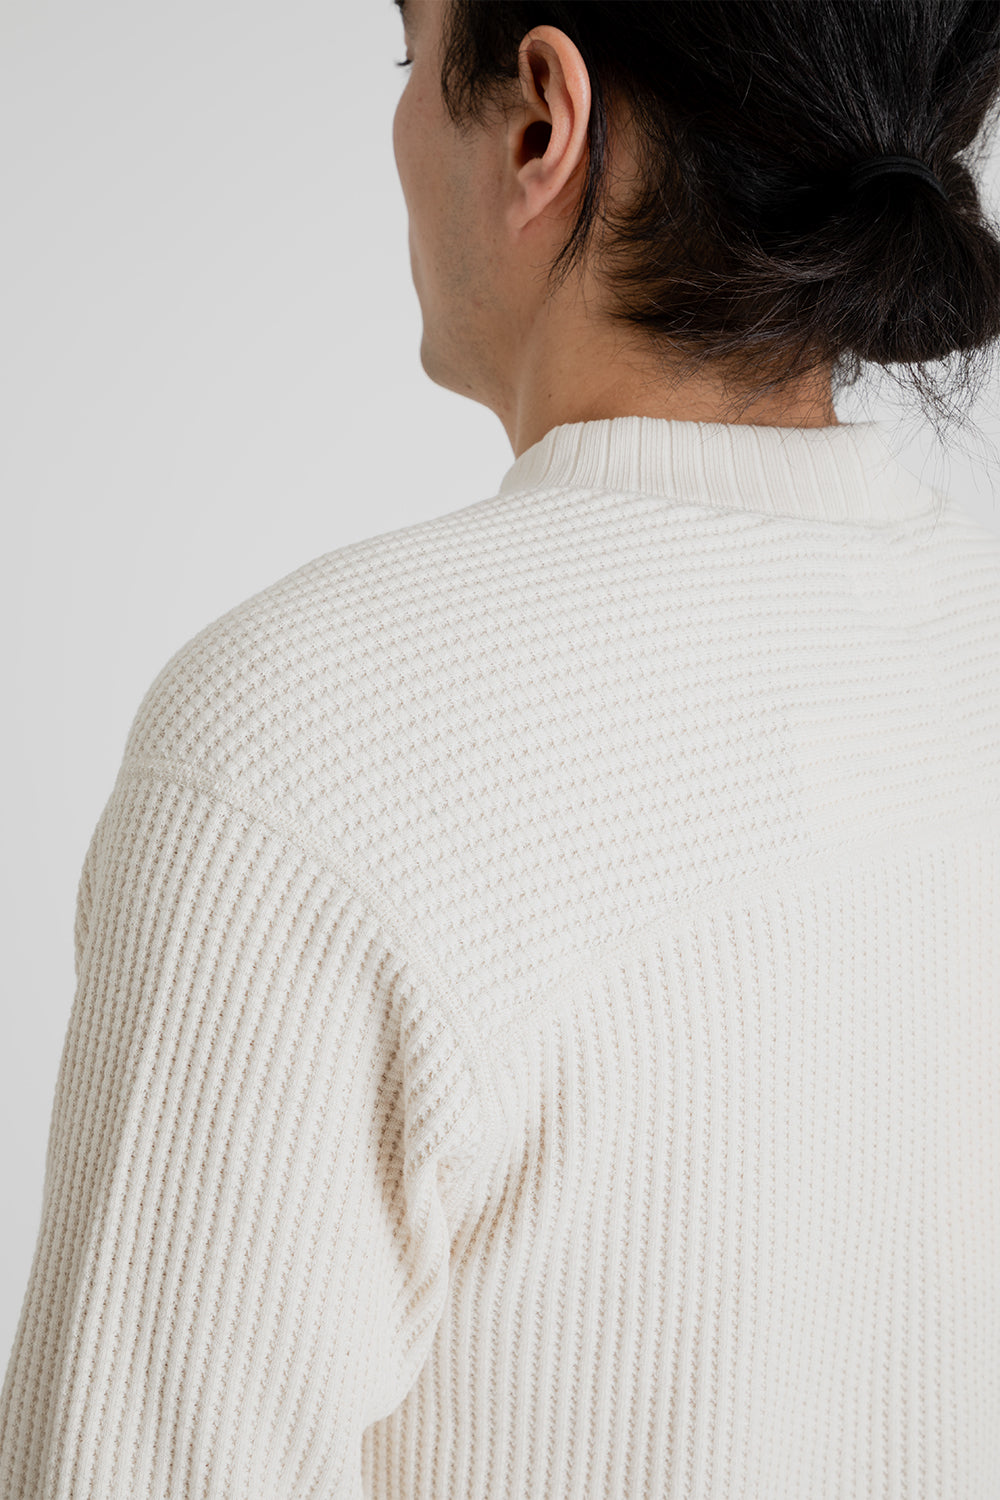 Jackman Waffle Midneck in Ivory